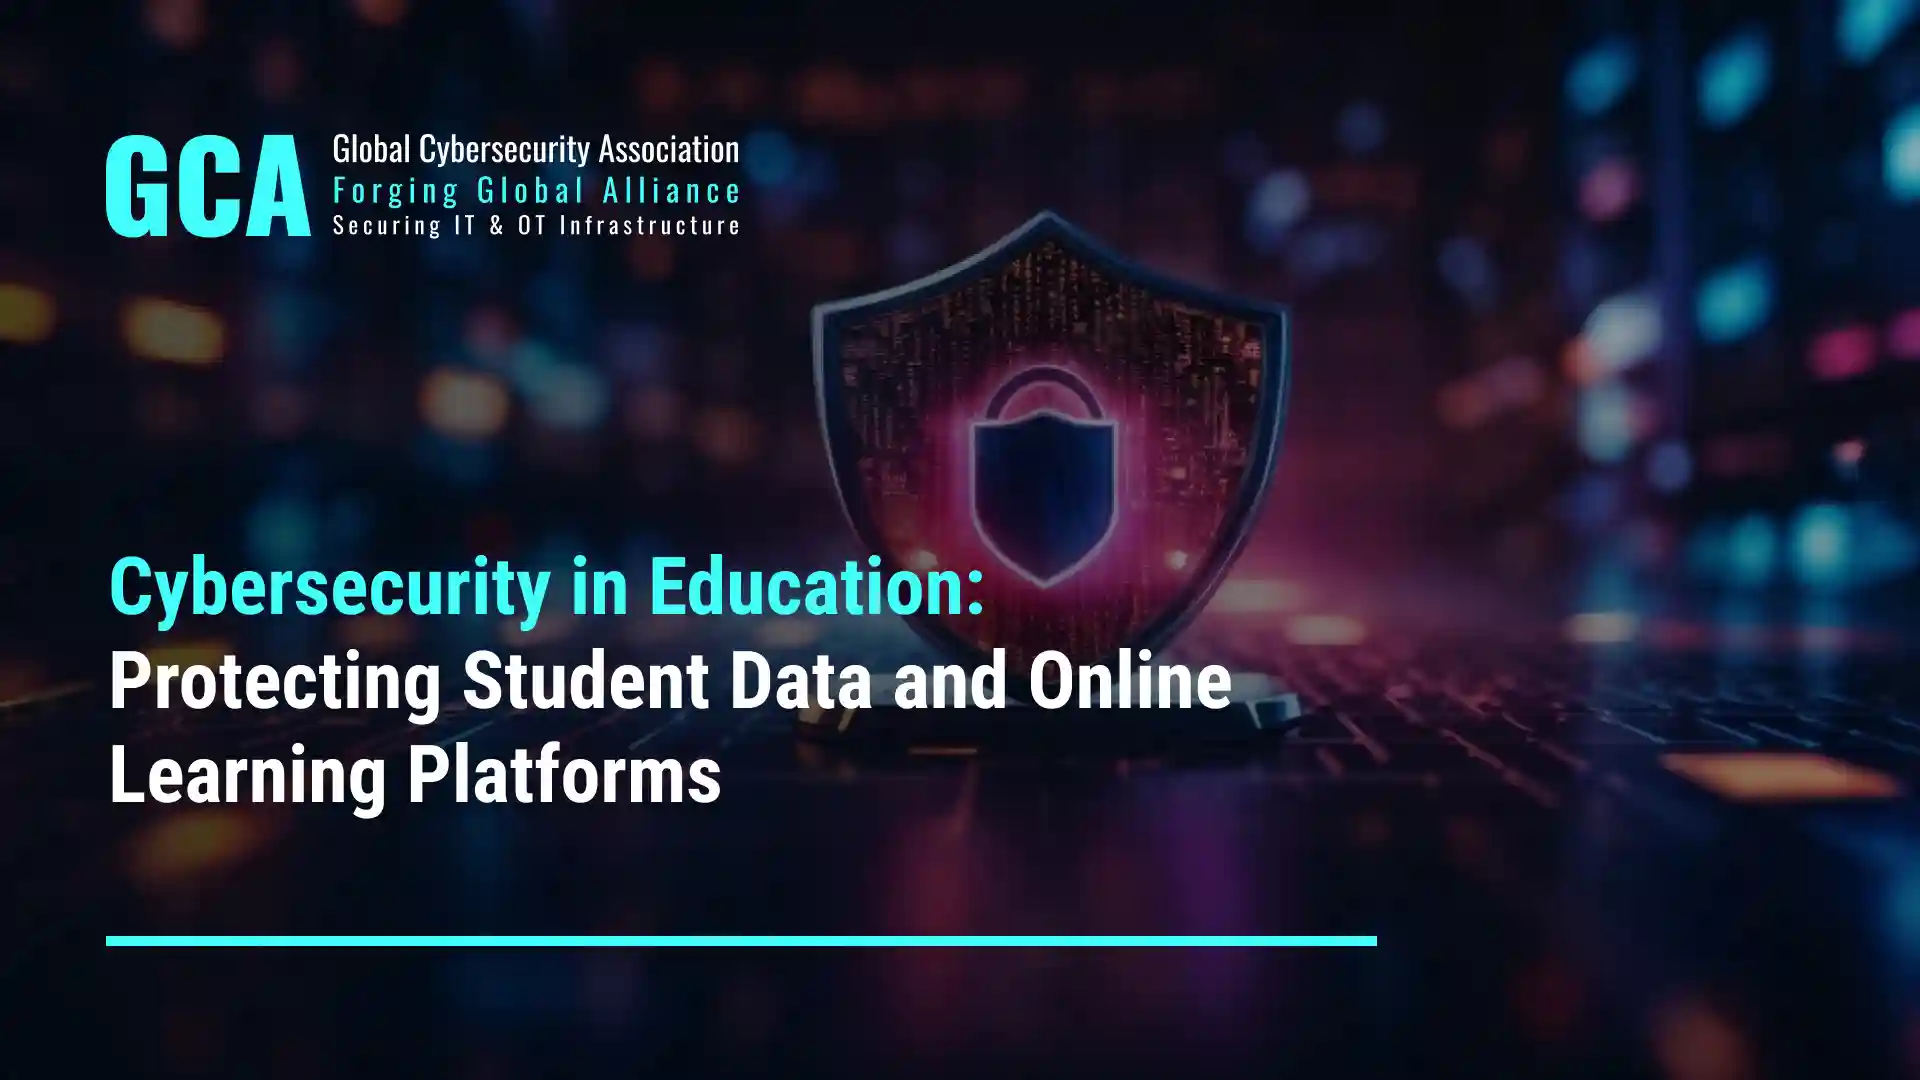 Cybersecurity in Education: Protecting Student Data and Online Learning Platforms